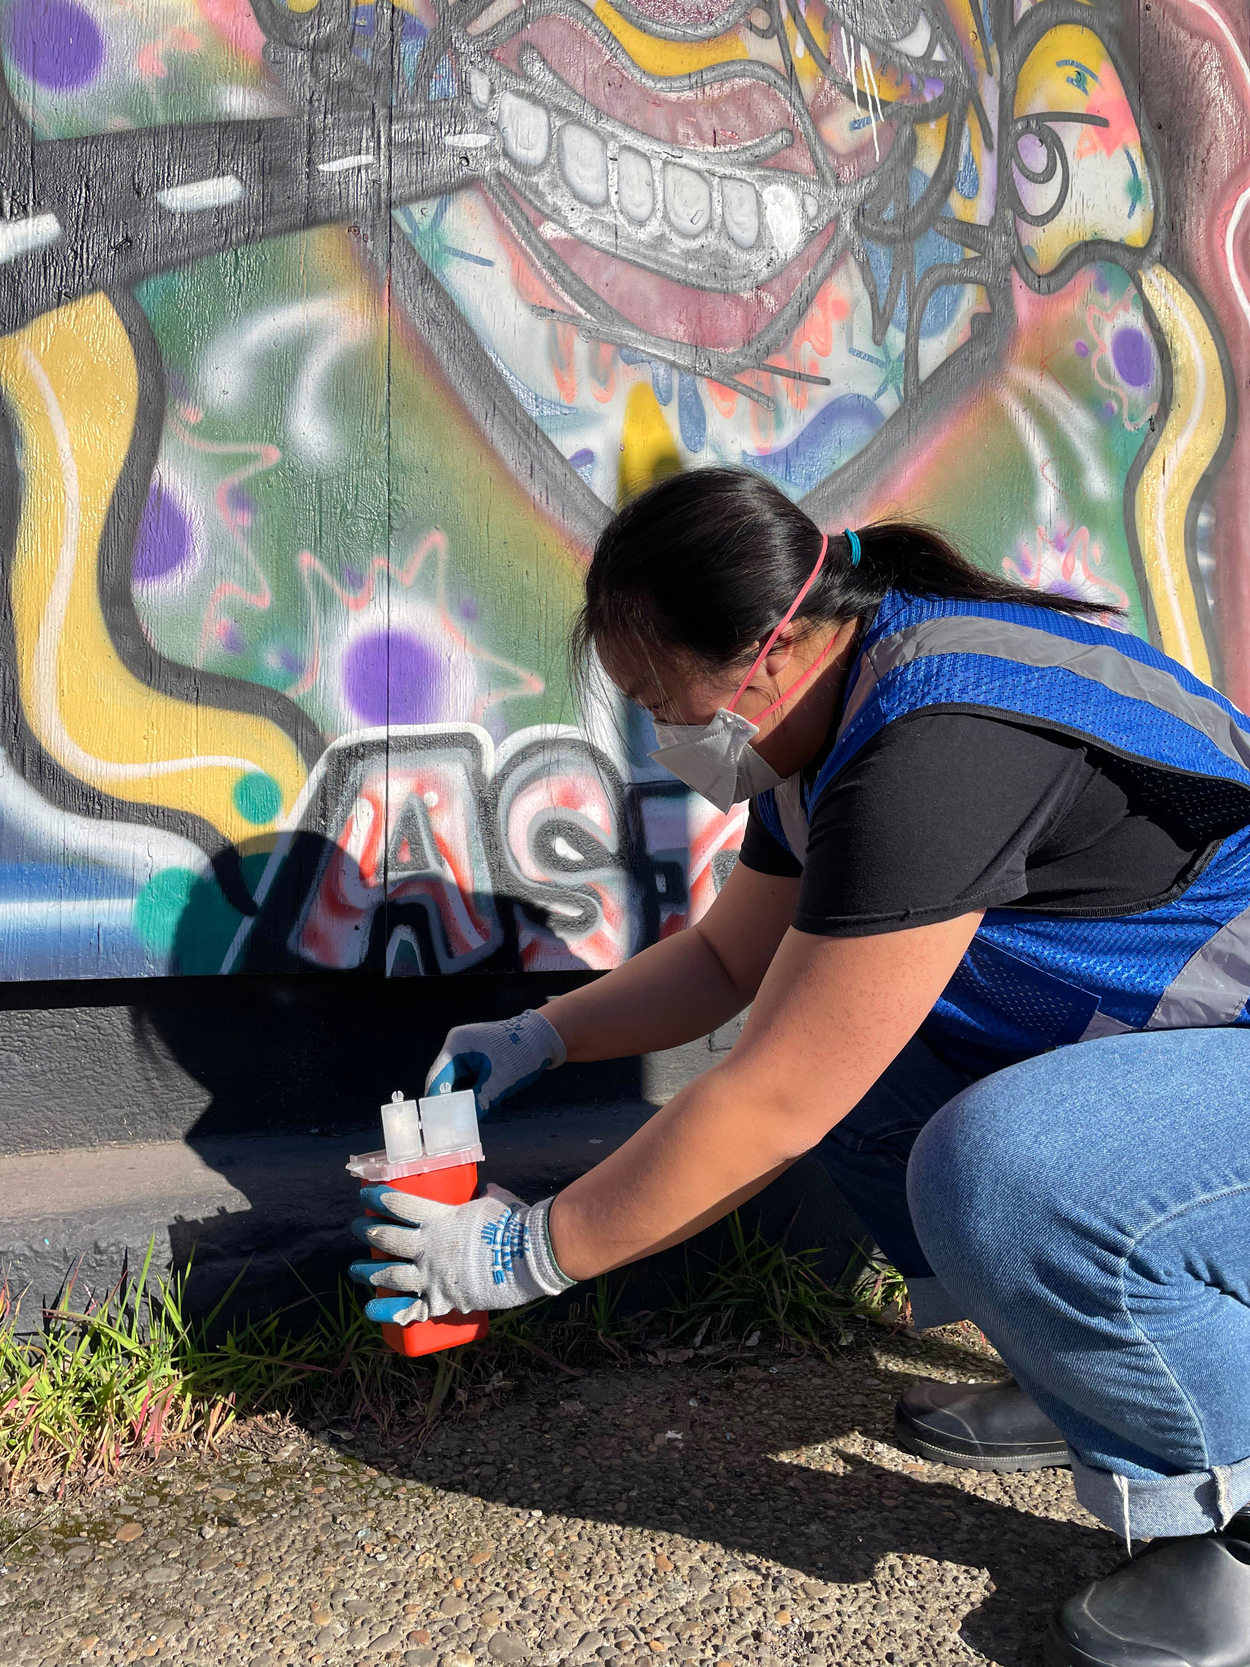 An image of volunteer kneeling to pick up sharps in front of a graffitied wall.